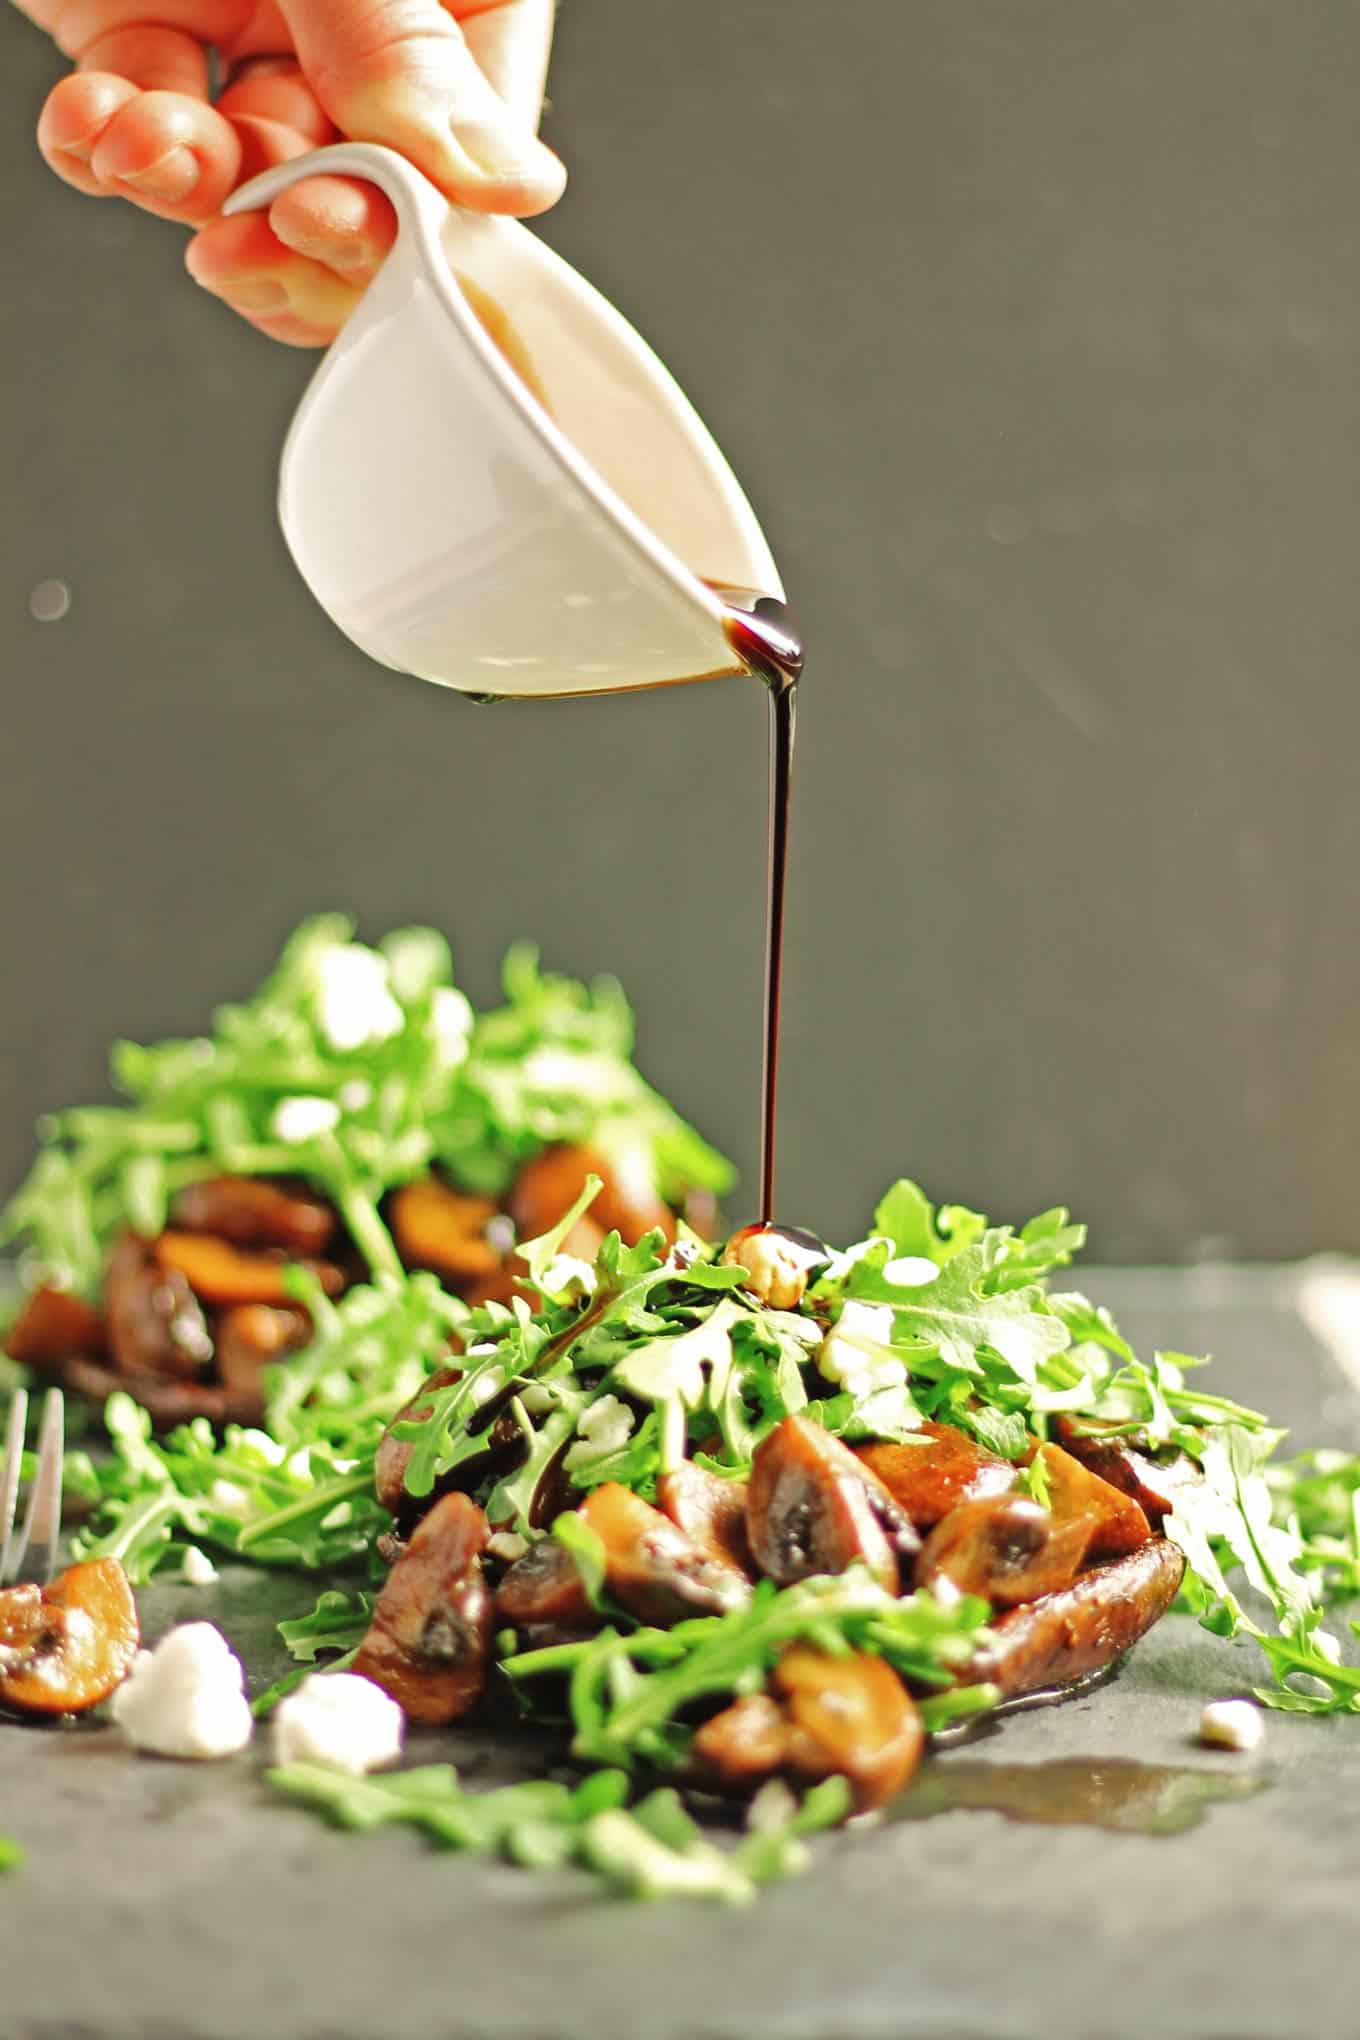 Stacked ale mushrooms with arugula and goat cheese recipe! This 2-mushroom vegetarian dish is sure to please that beer lover in your life. SO GOOD! // Rhubarbarians